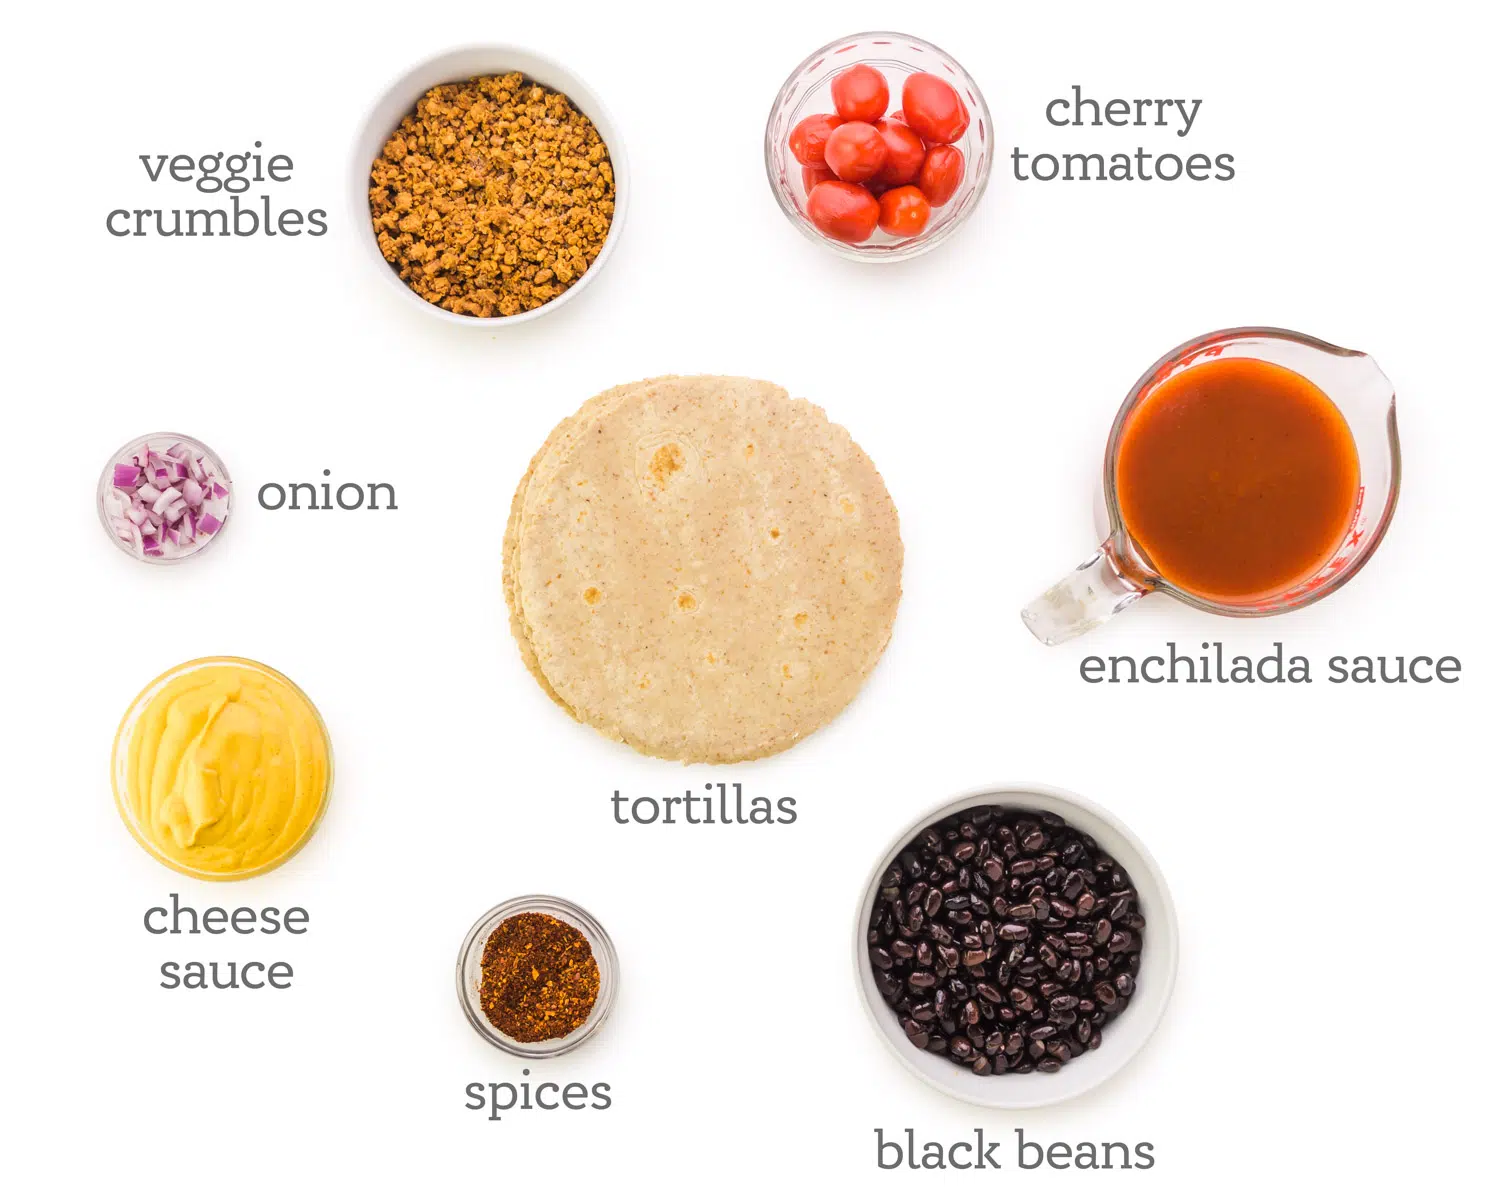 Ingredients are spread across a white table. The labels next to them read, cherry tomatoes, enchilada sauce, black beans, tortillas, spices, cheese sauce, onions, and veggie crumbles.